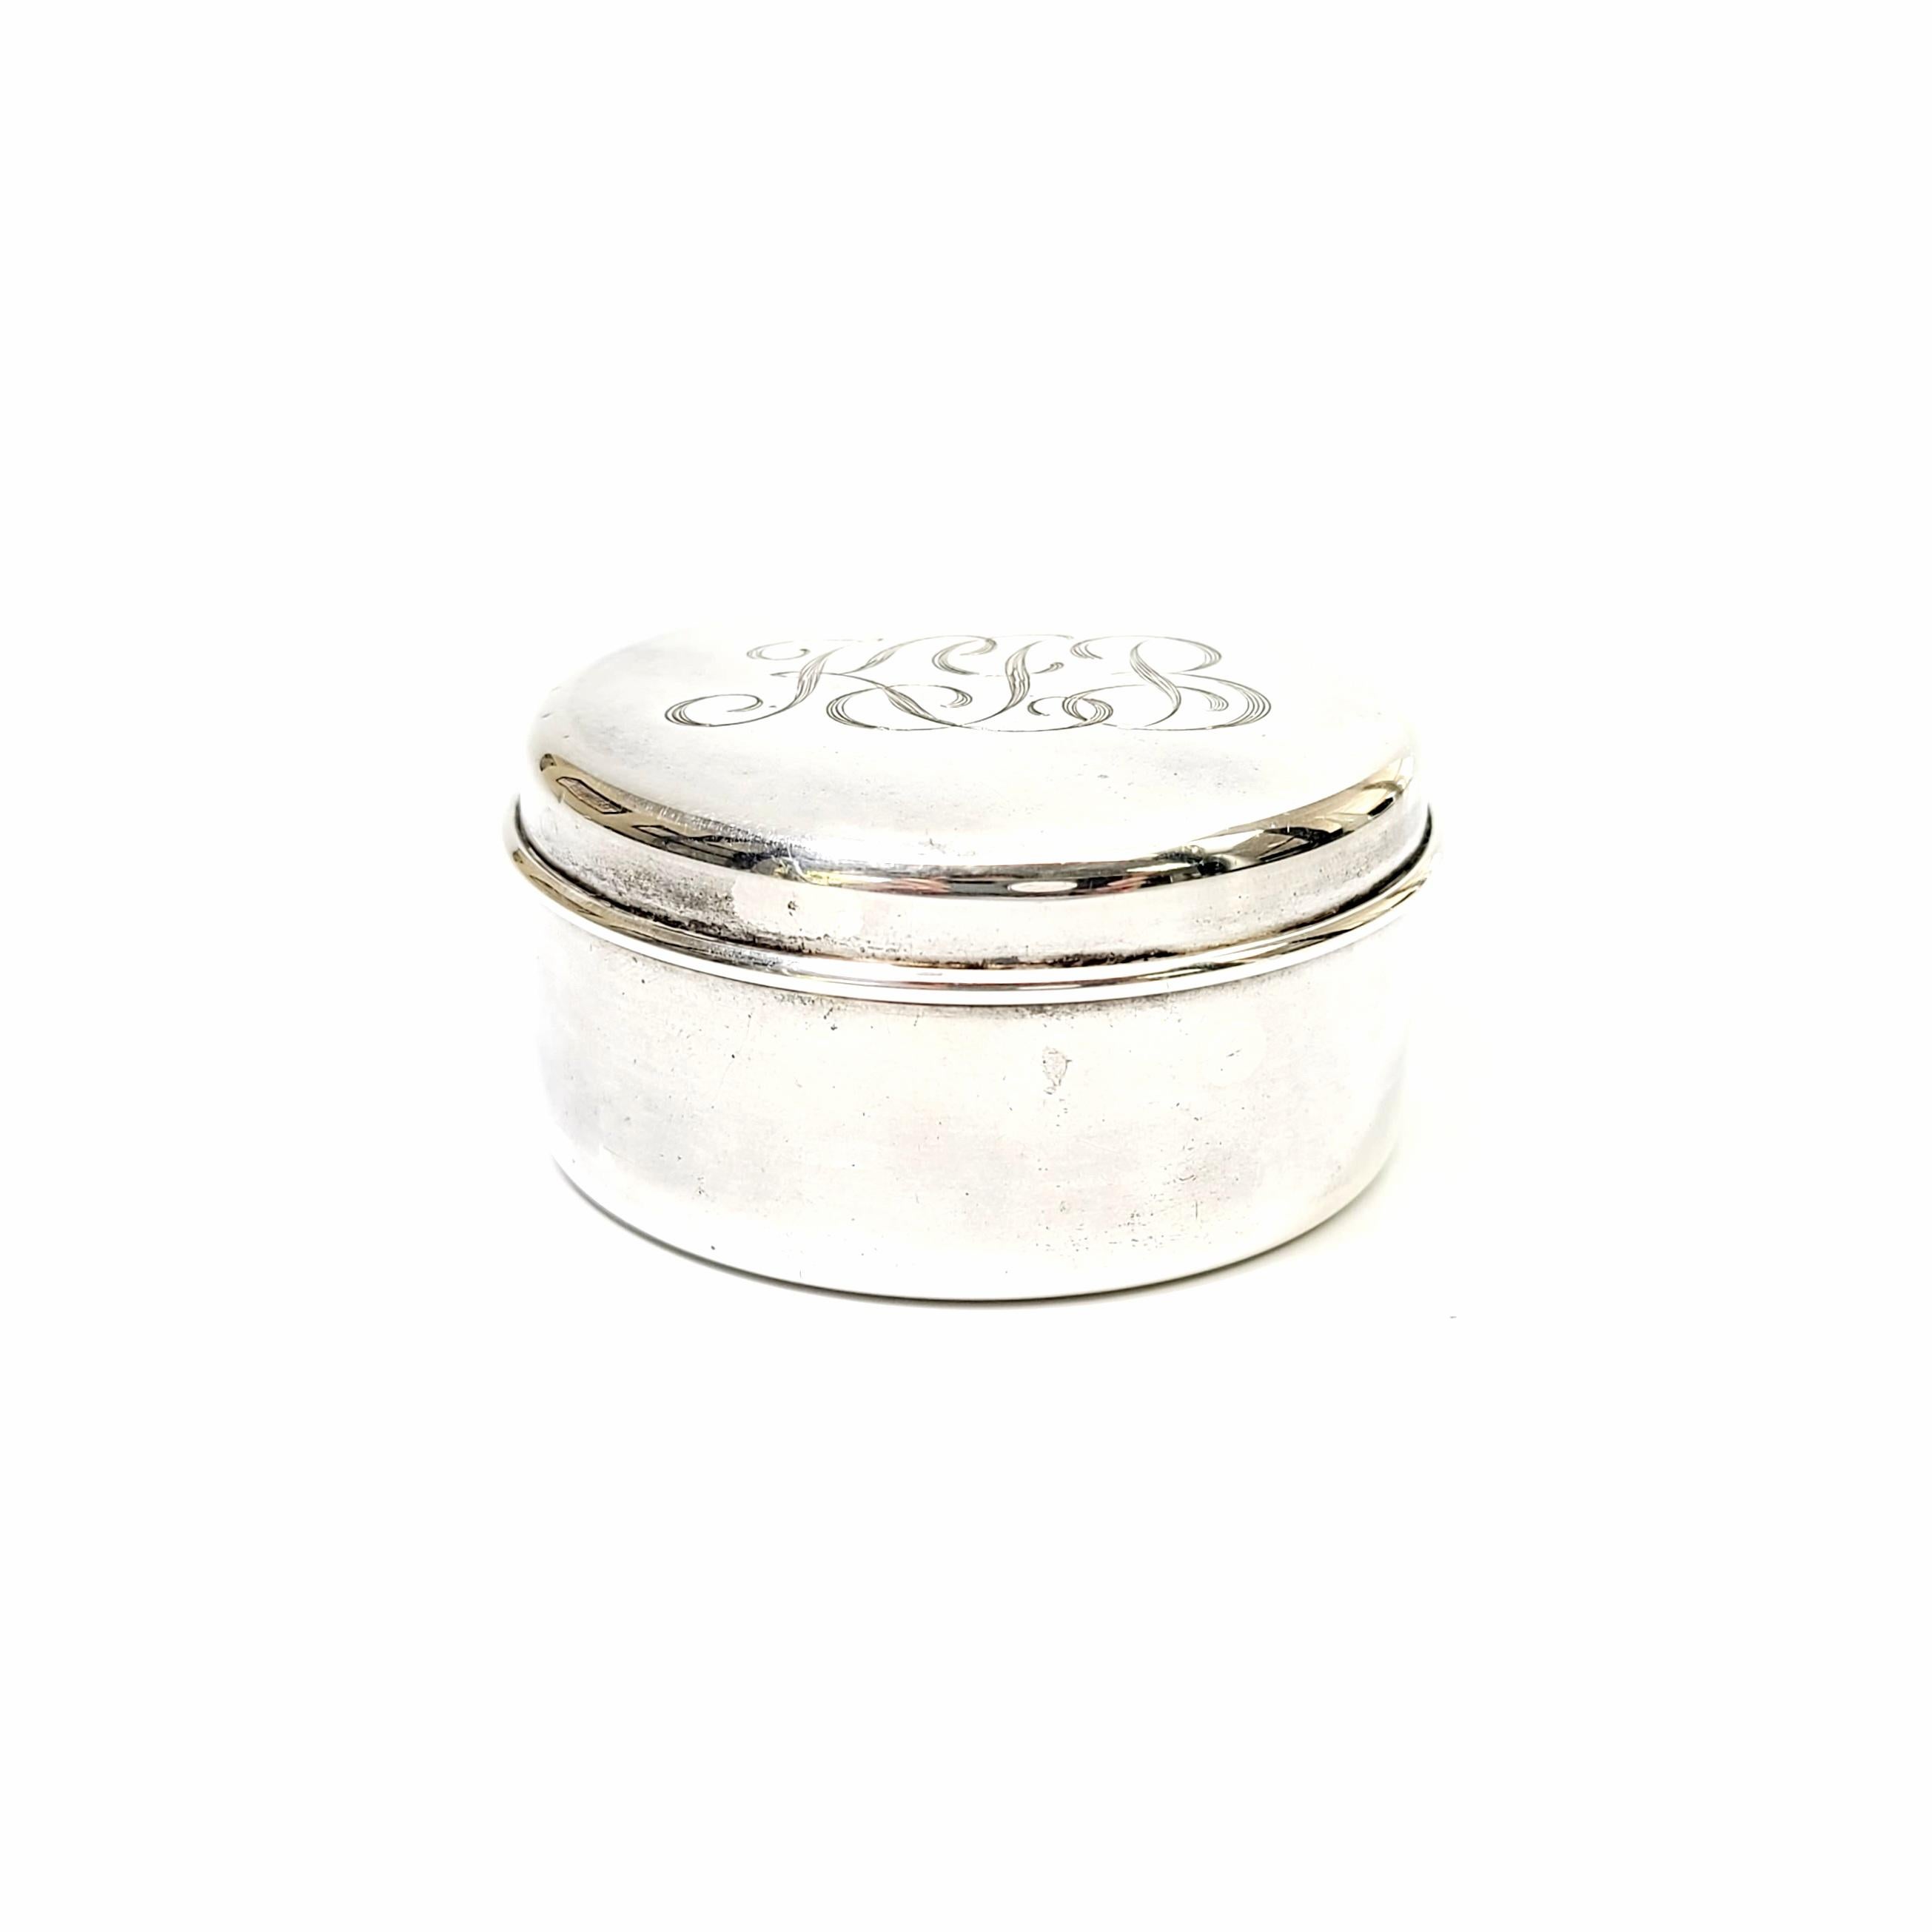 Vintage sterling silver jewelry or trinket box by Tiffany & Co.

Beautiful small round box featuring a simple and timeless design. Does not include Tiffany pouch or box.

Monogram appears to be KJB

Box measures: approximate 2 1/8